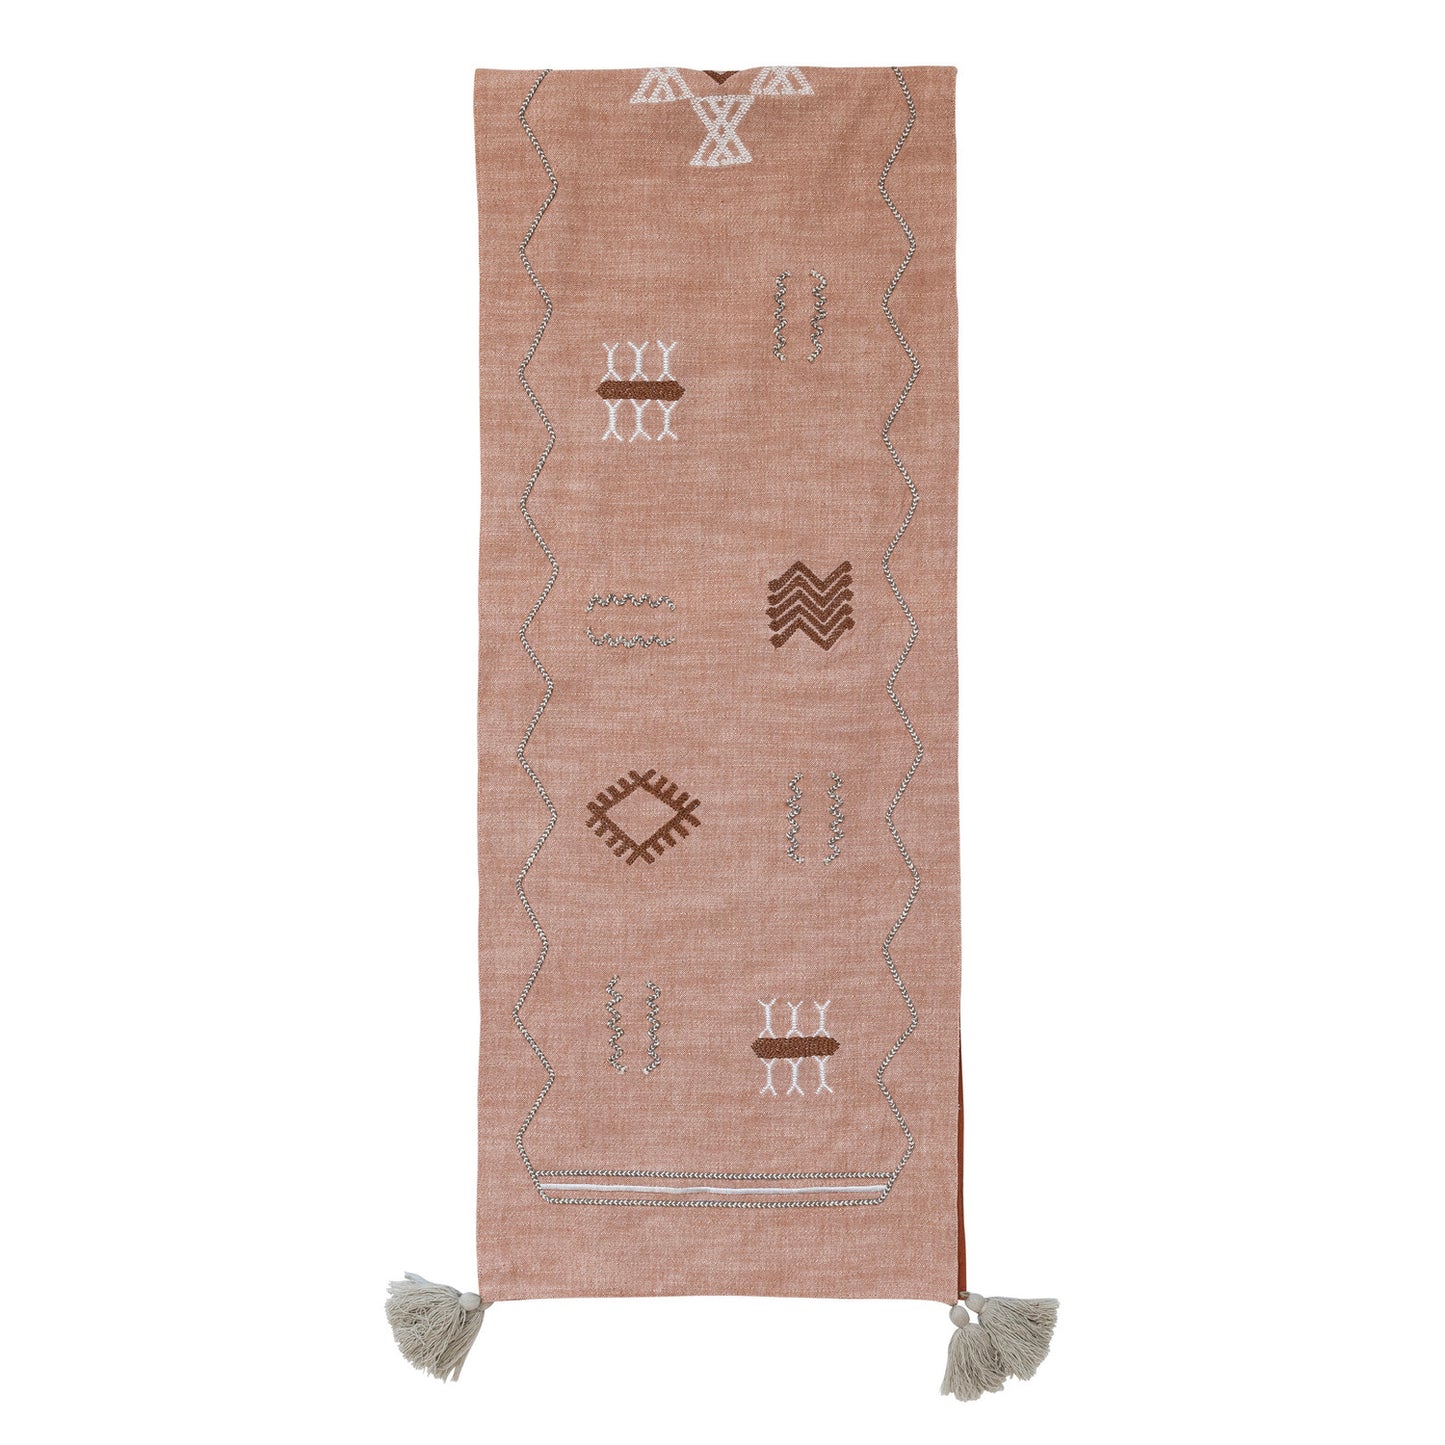 Table Runner w/ Embroidered Moroccan Design & Tassels - Shop Wild Ivy